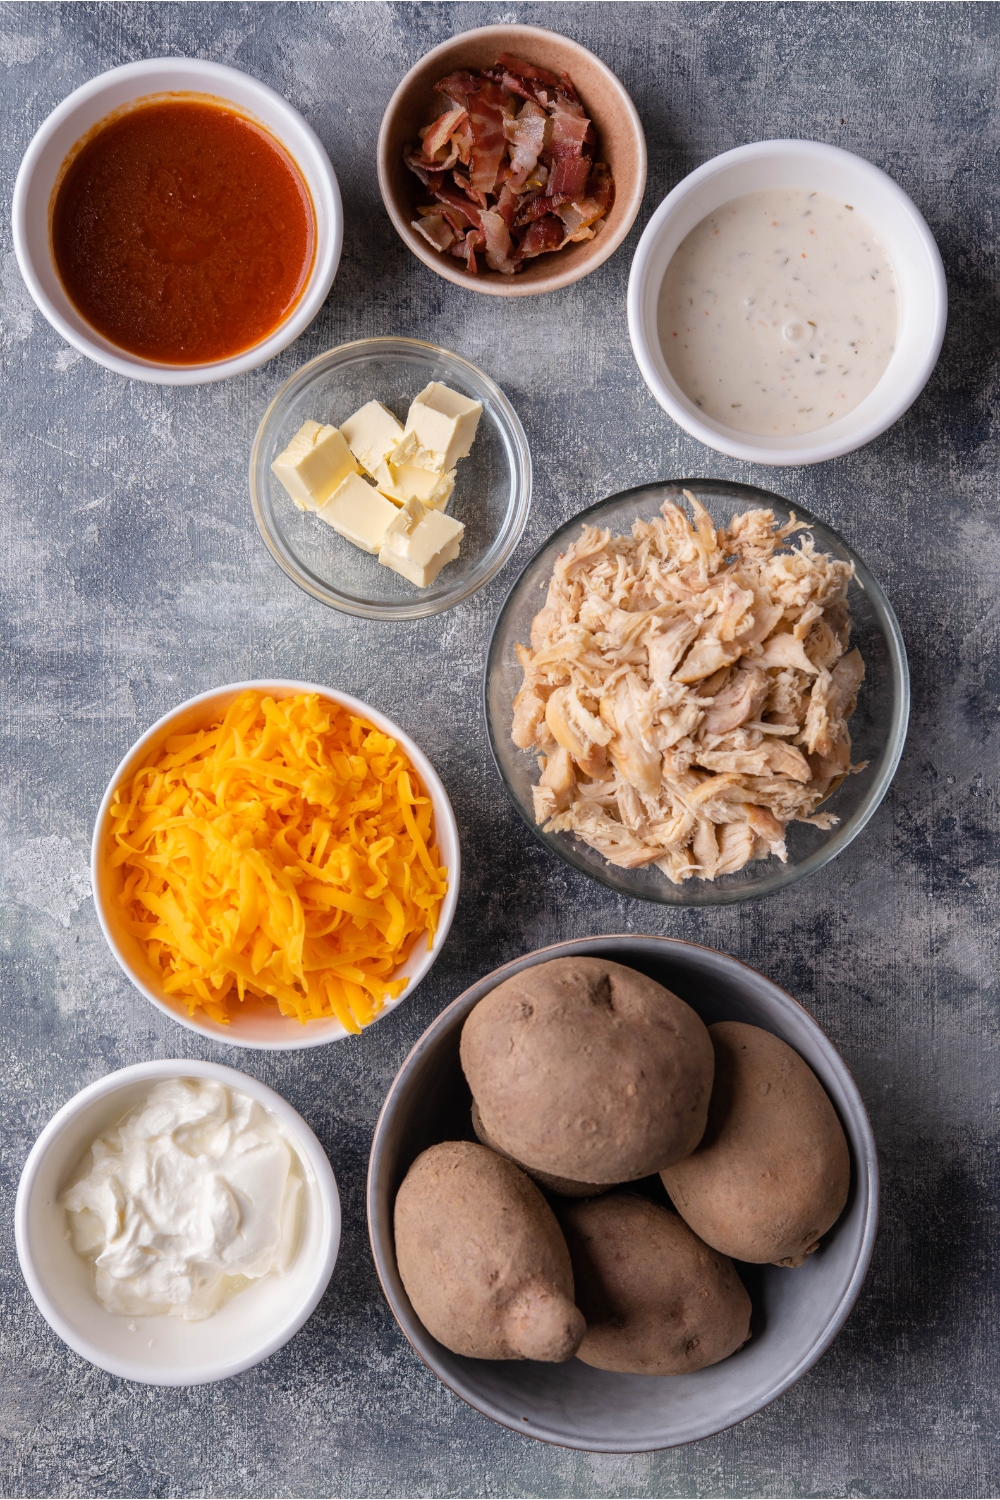 An assortment of ingredients for buffalo chicken casserole including bowls of potatoes, shredded cheese, shredded chicken, ranch dressing, buffalo sauce, and sour cream.